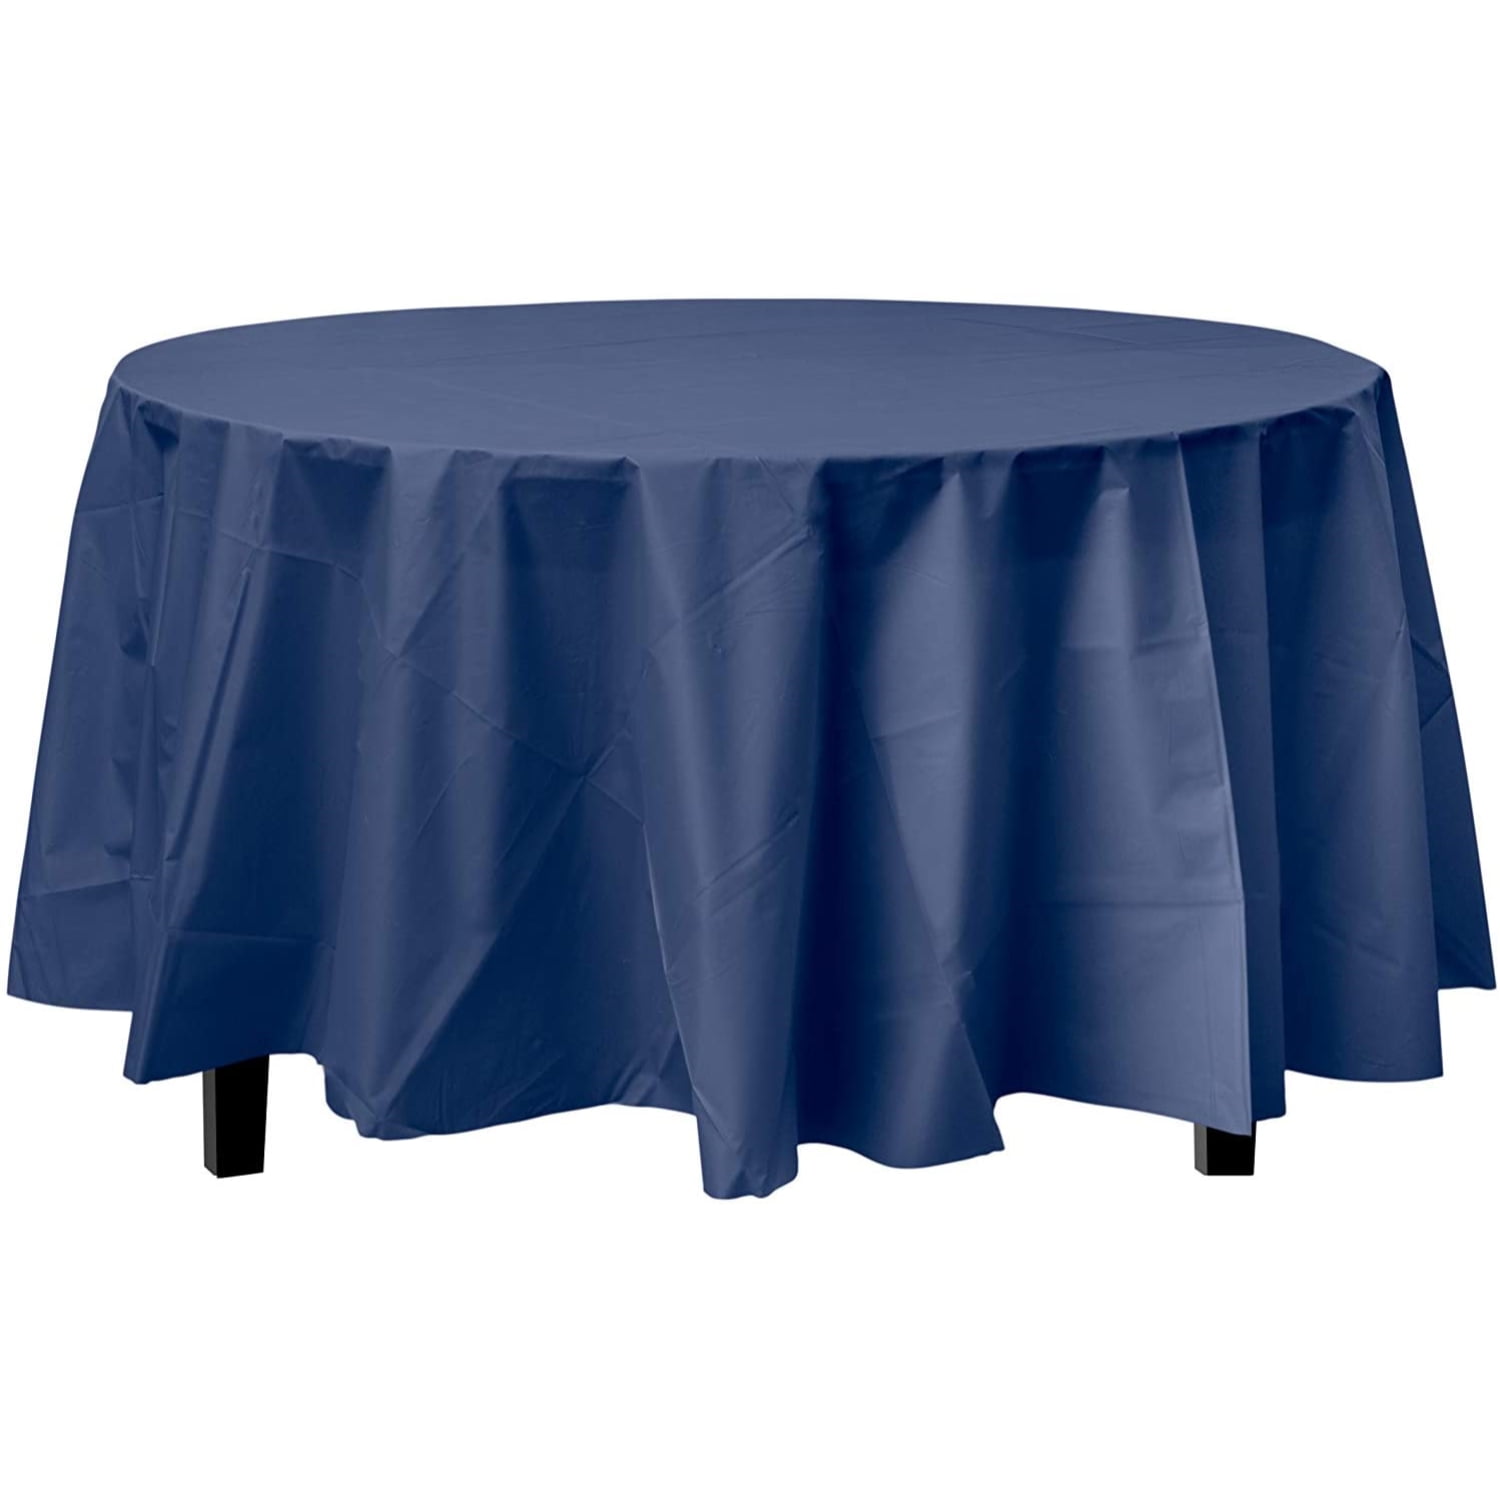 Navy Blue Round Table Covers, 120 Inch Round Tablecloth Bulk